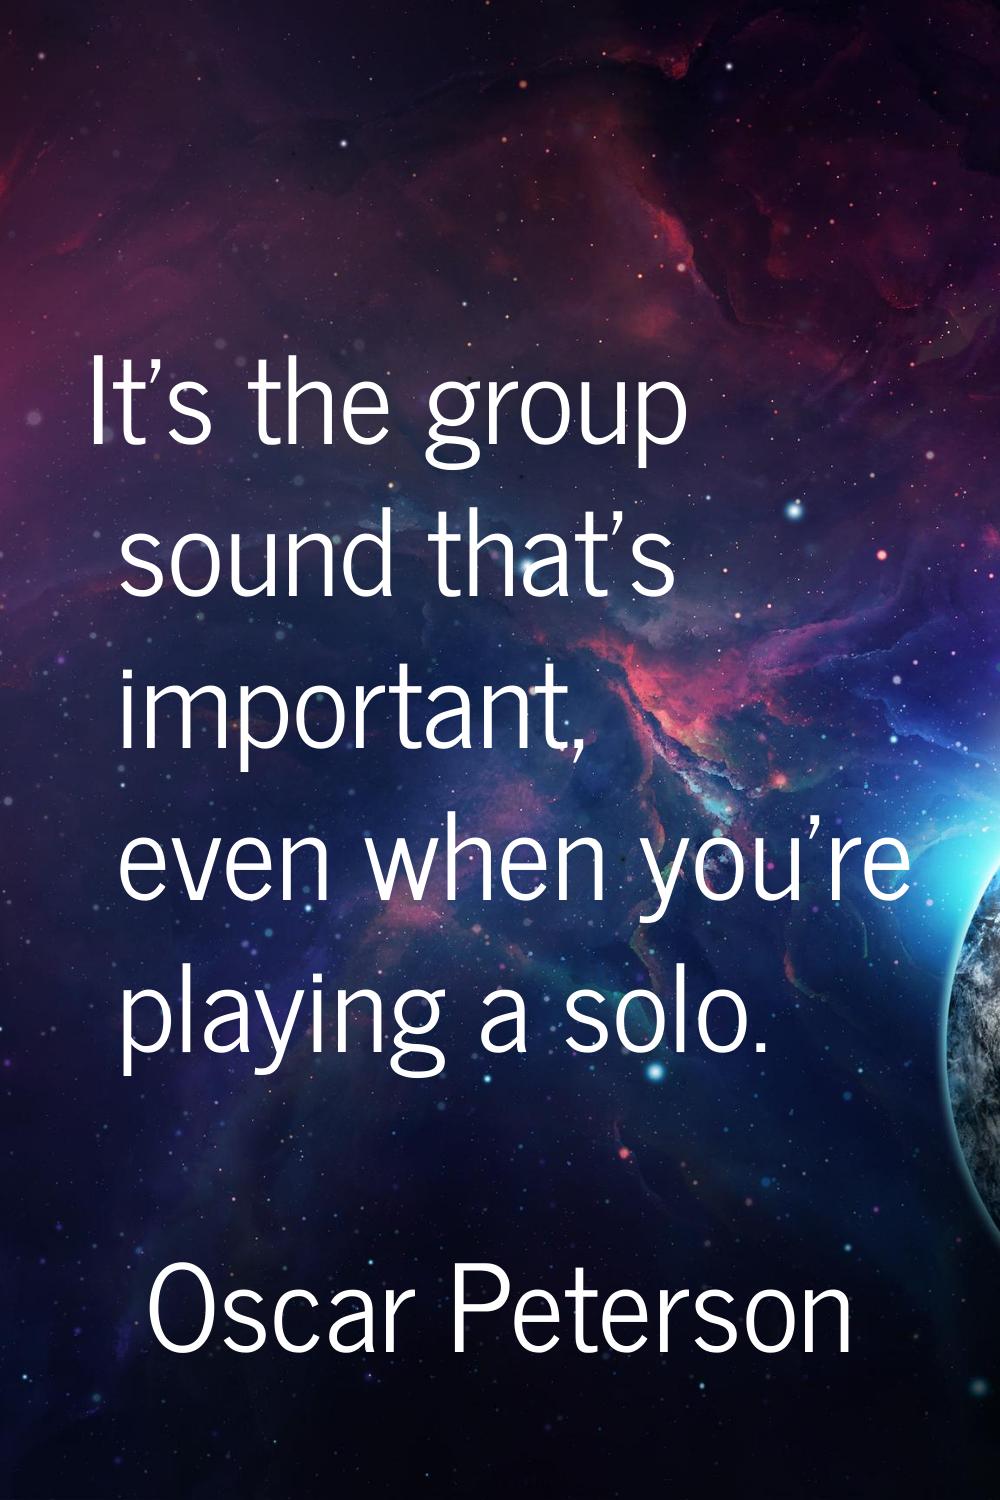 It's the group sound that's important, even when you're playing a solo.